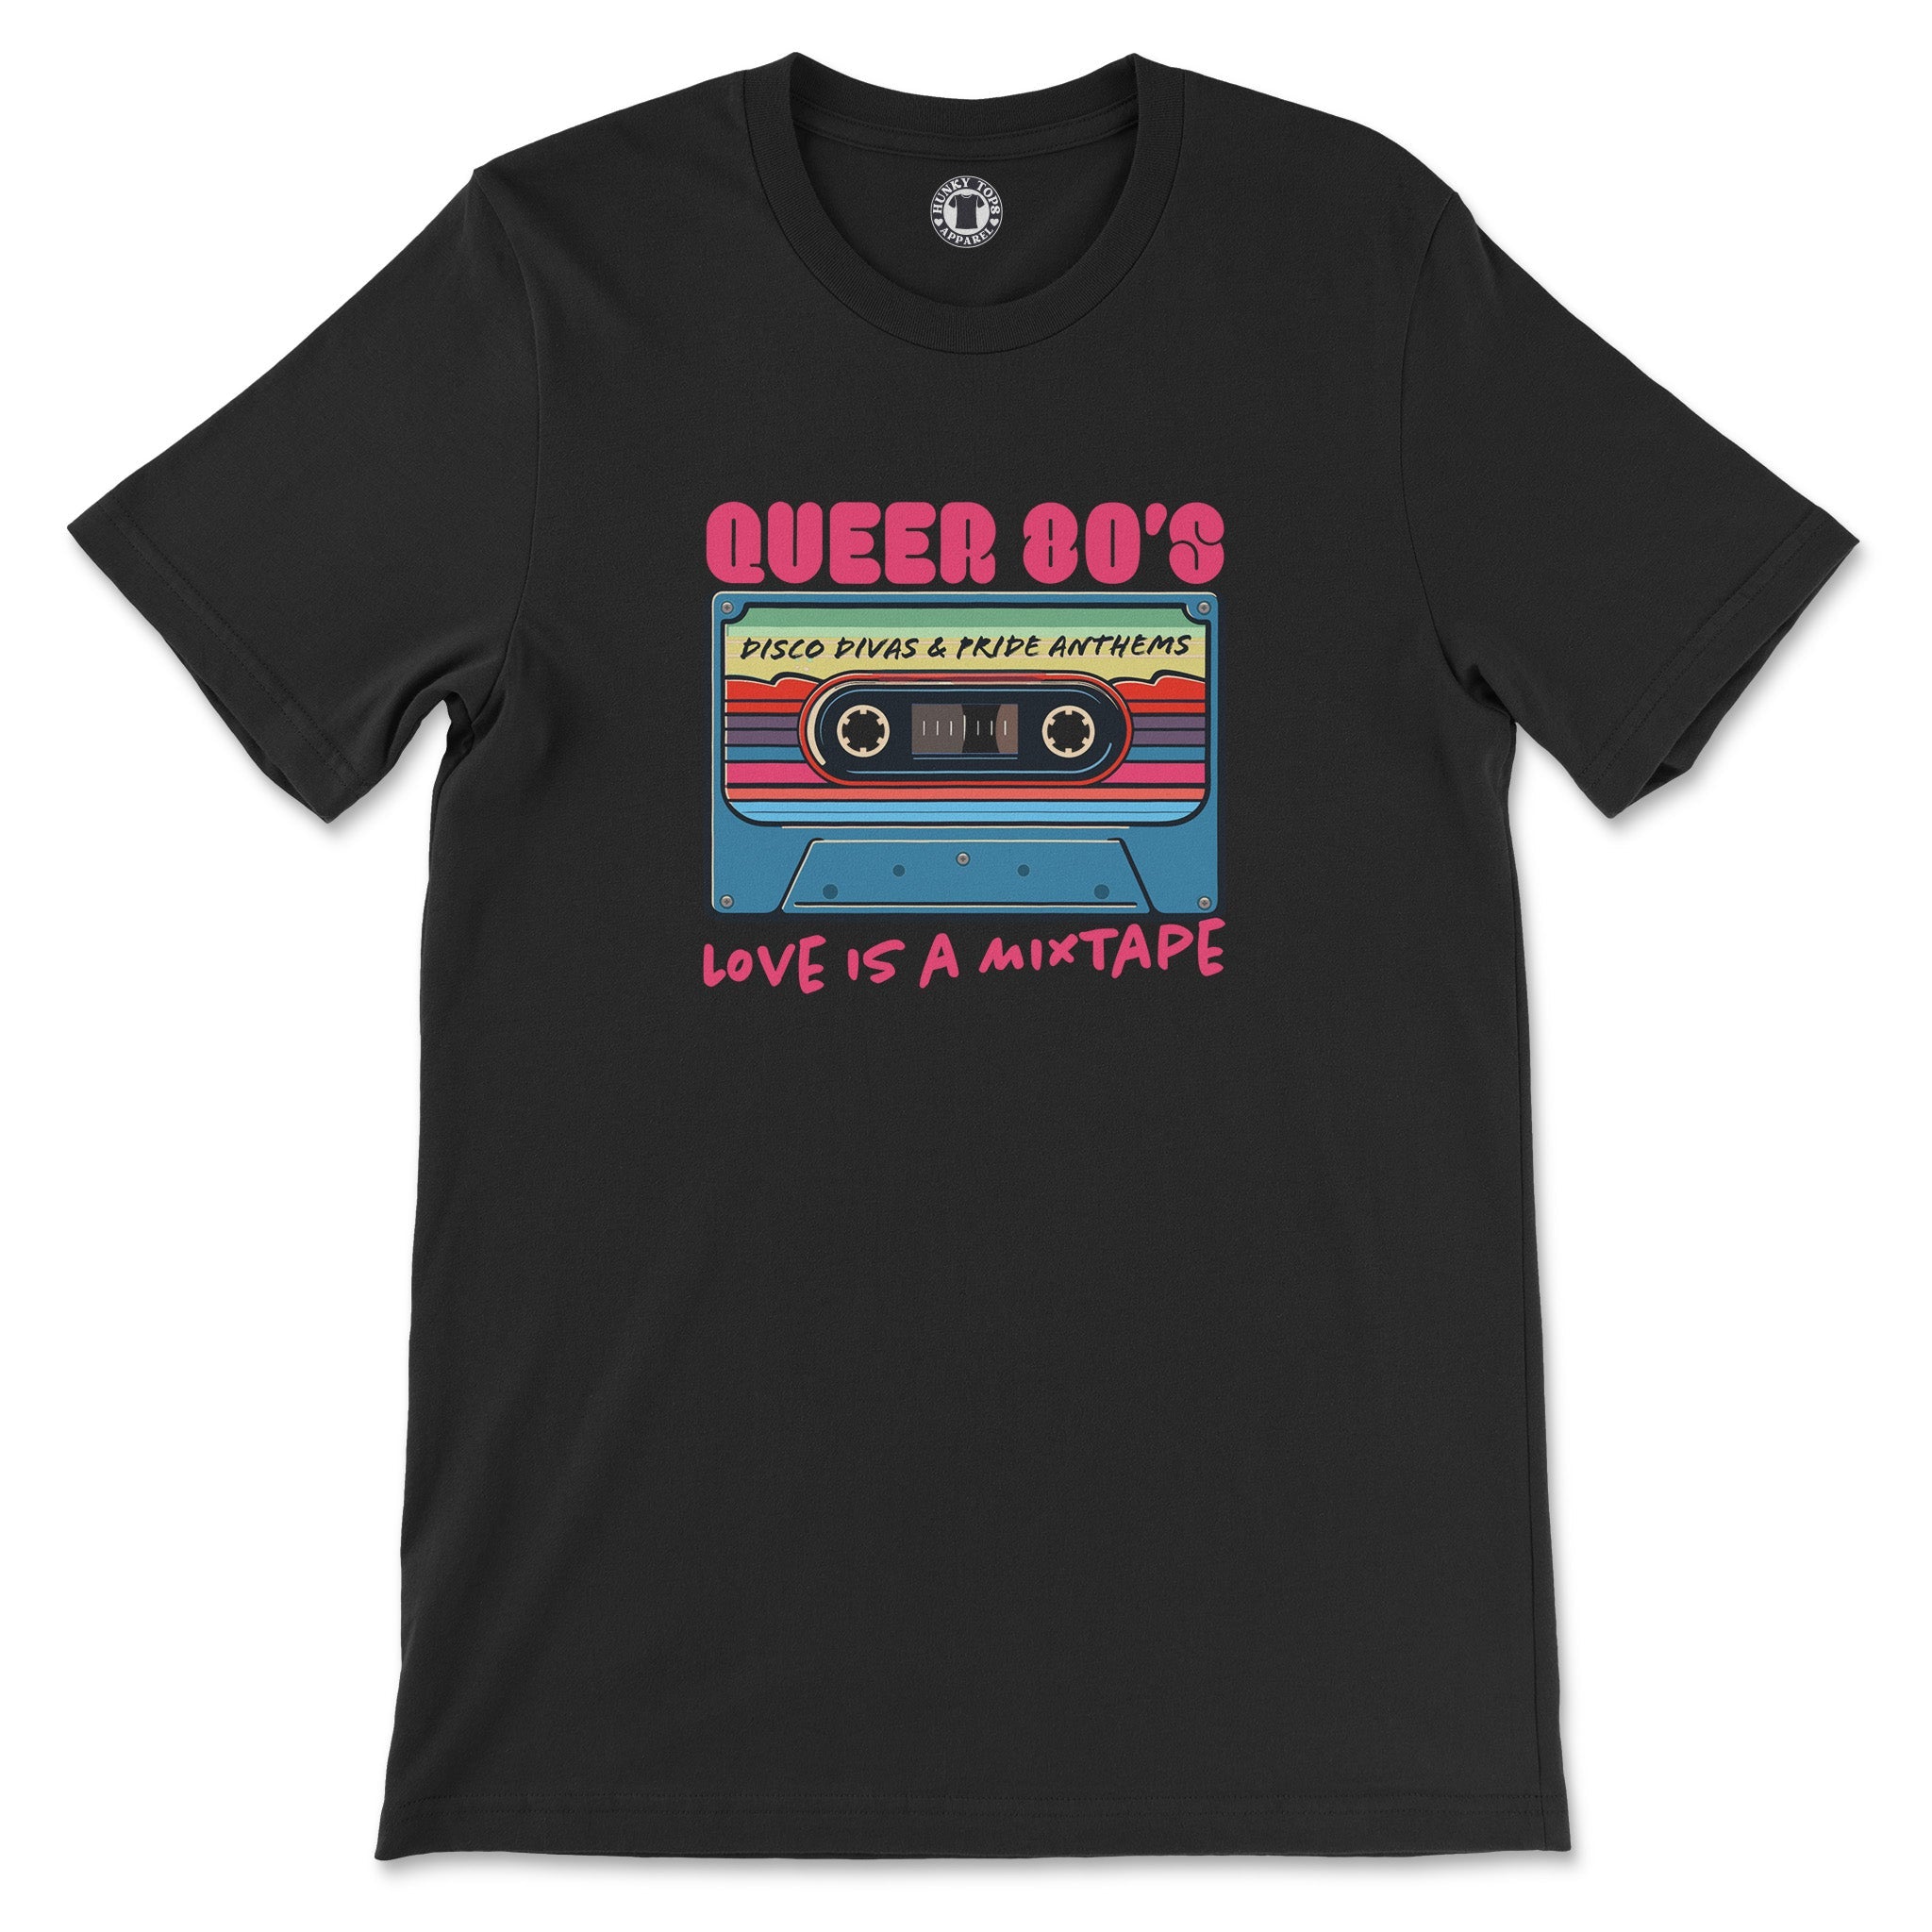 "Queer 80's: Love is a Mixtape" Cassette Graphic T-Shirt - Hunky Tops